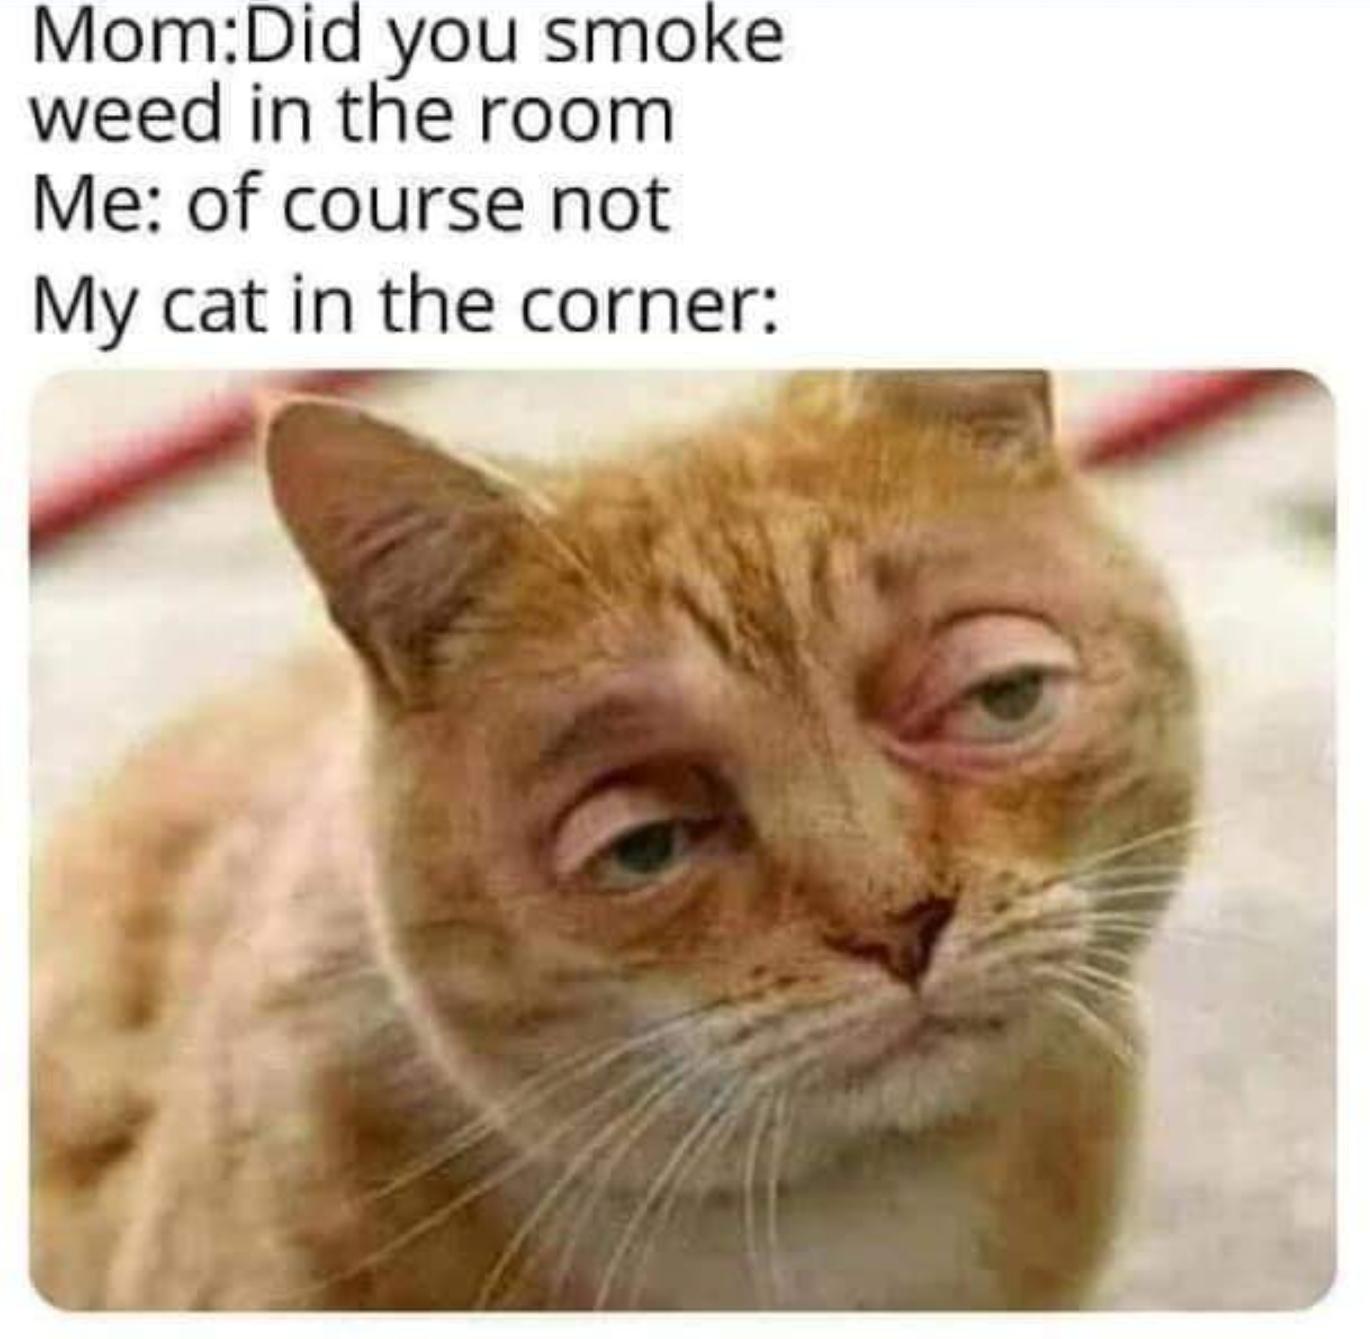 weed cat - MomDid you smoke weed in the room Me of course not My cat in the corner